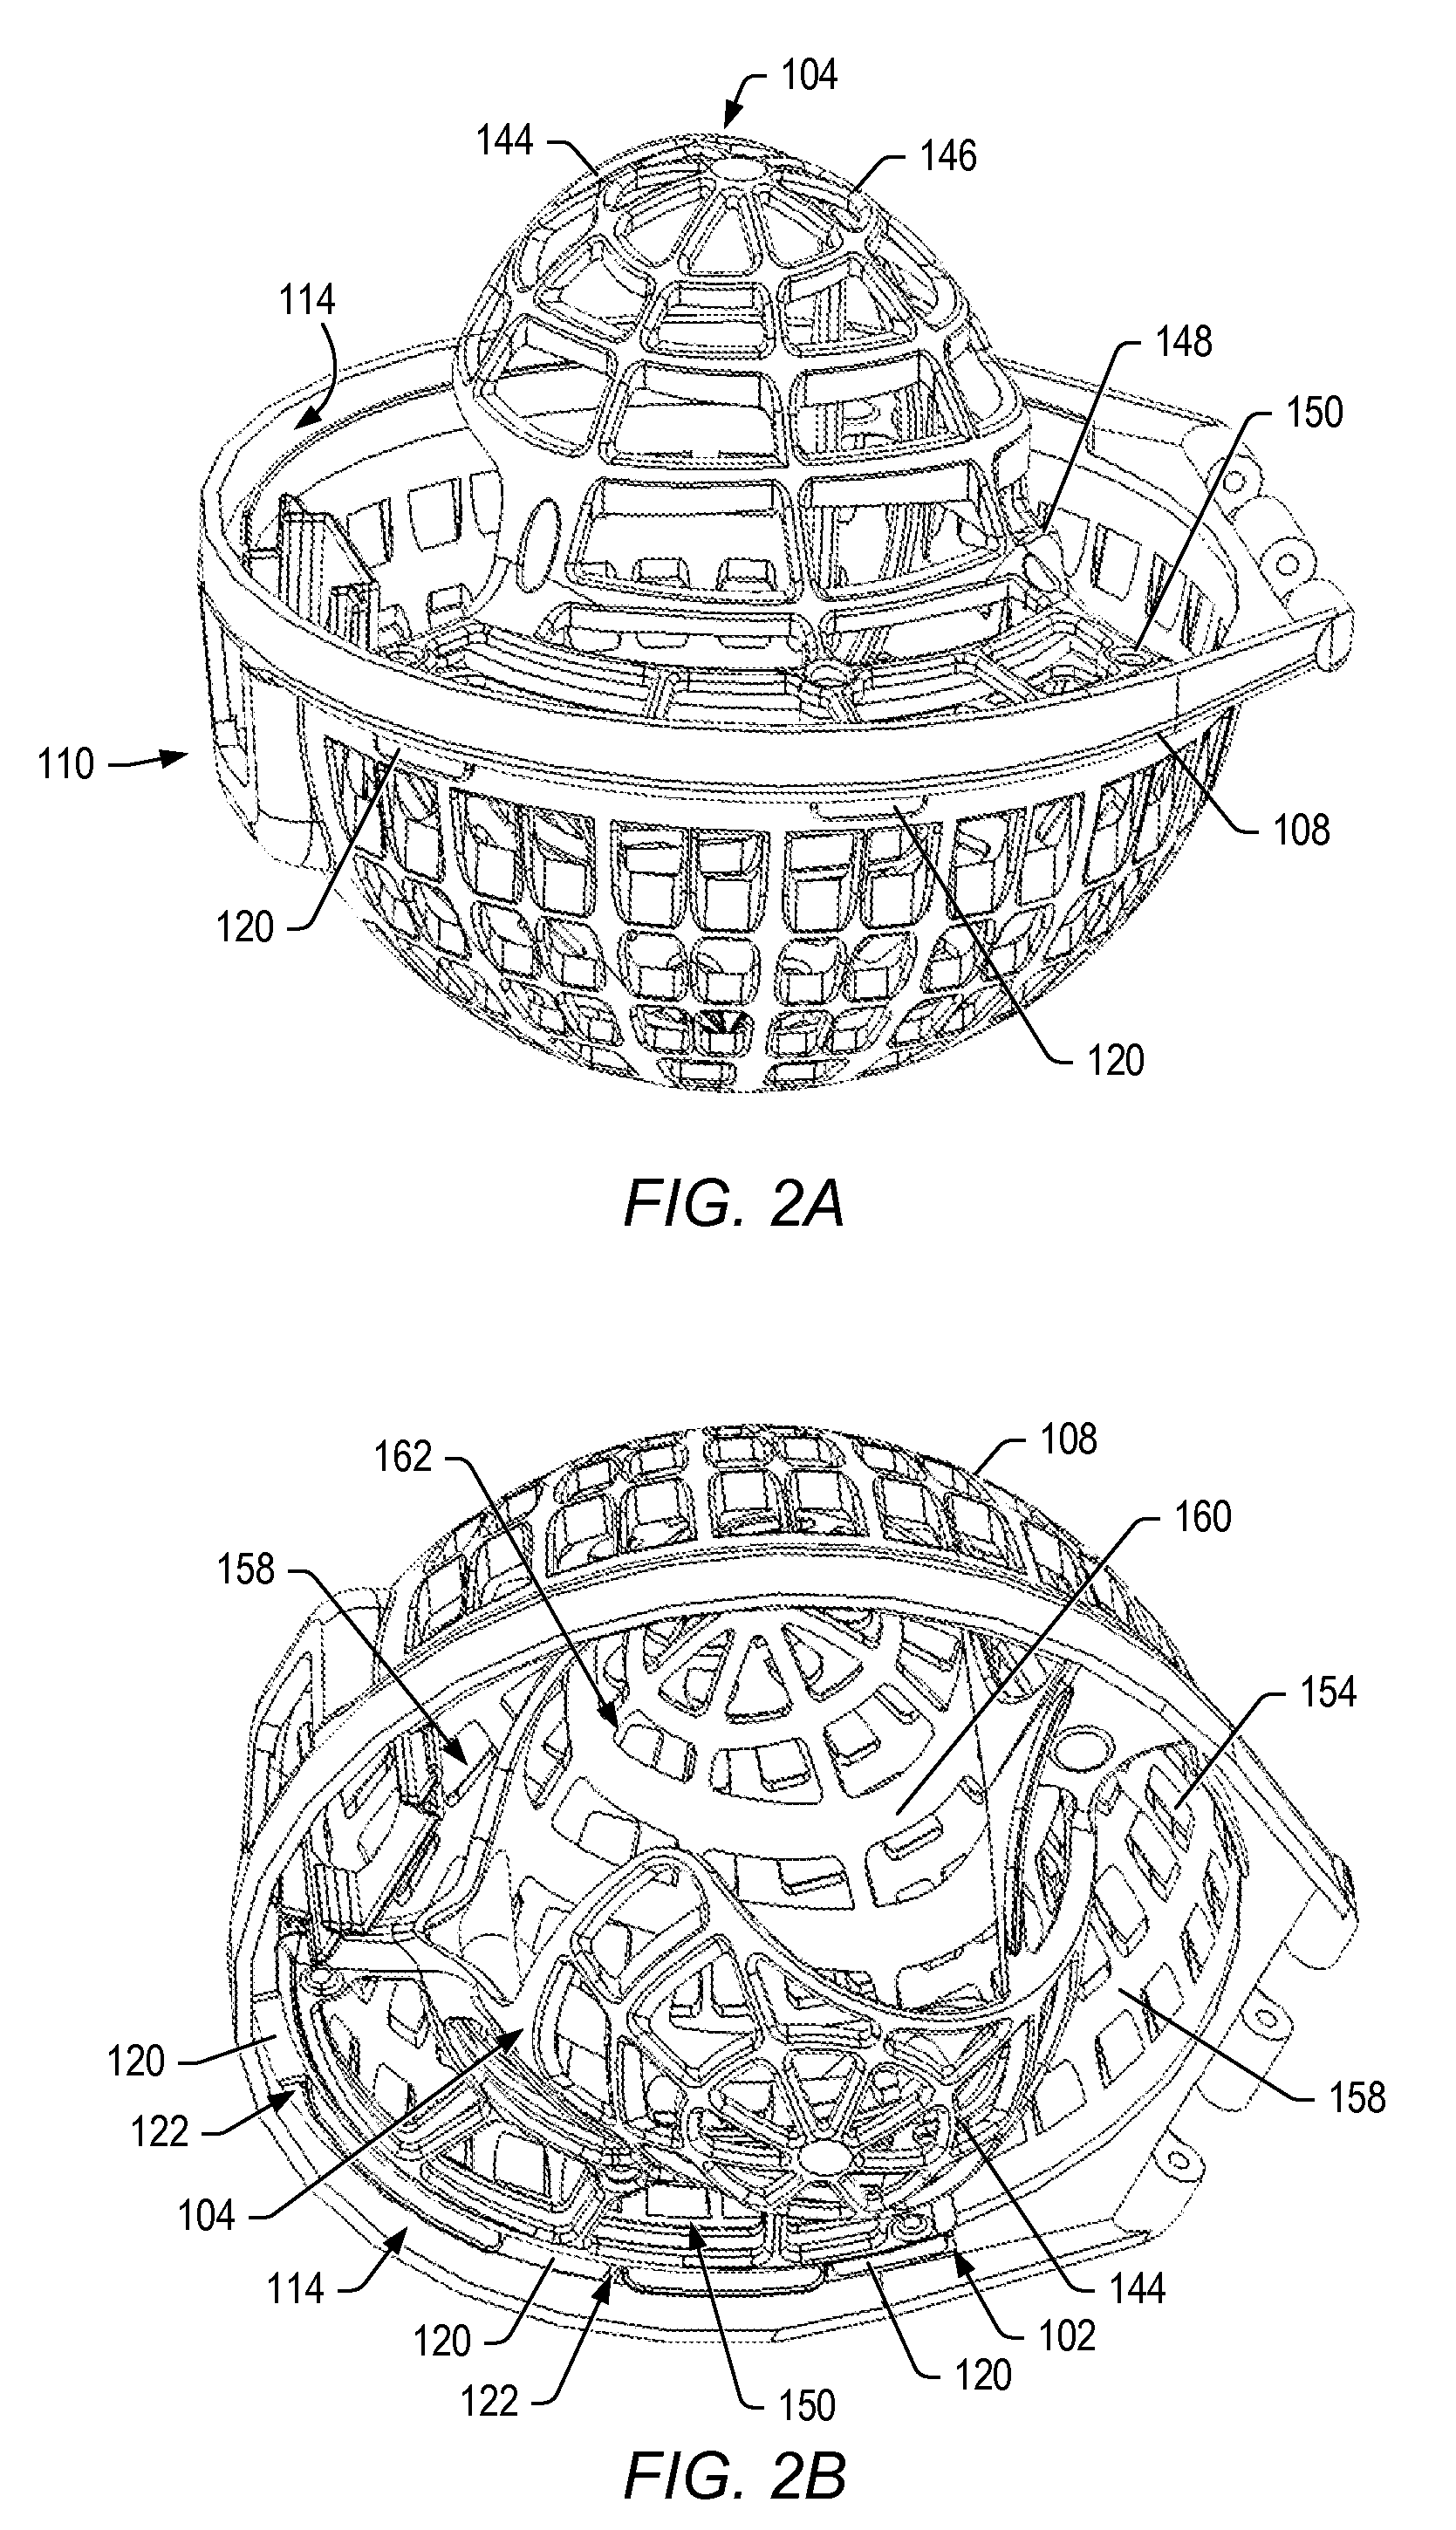 Garment washing device with removable form